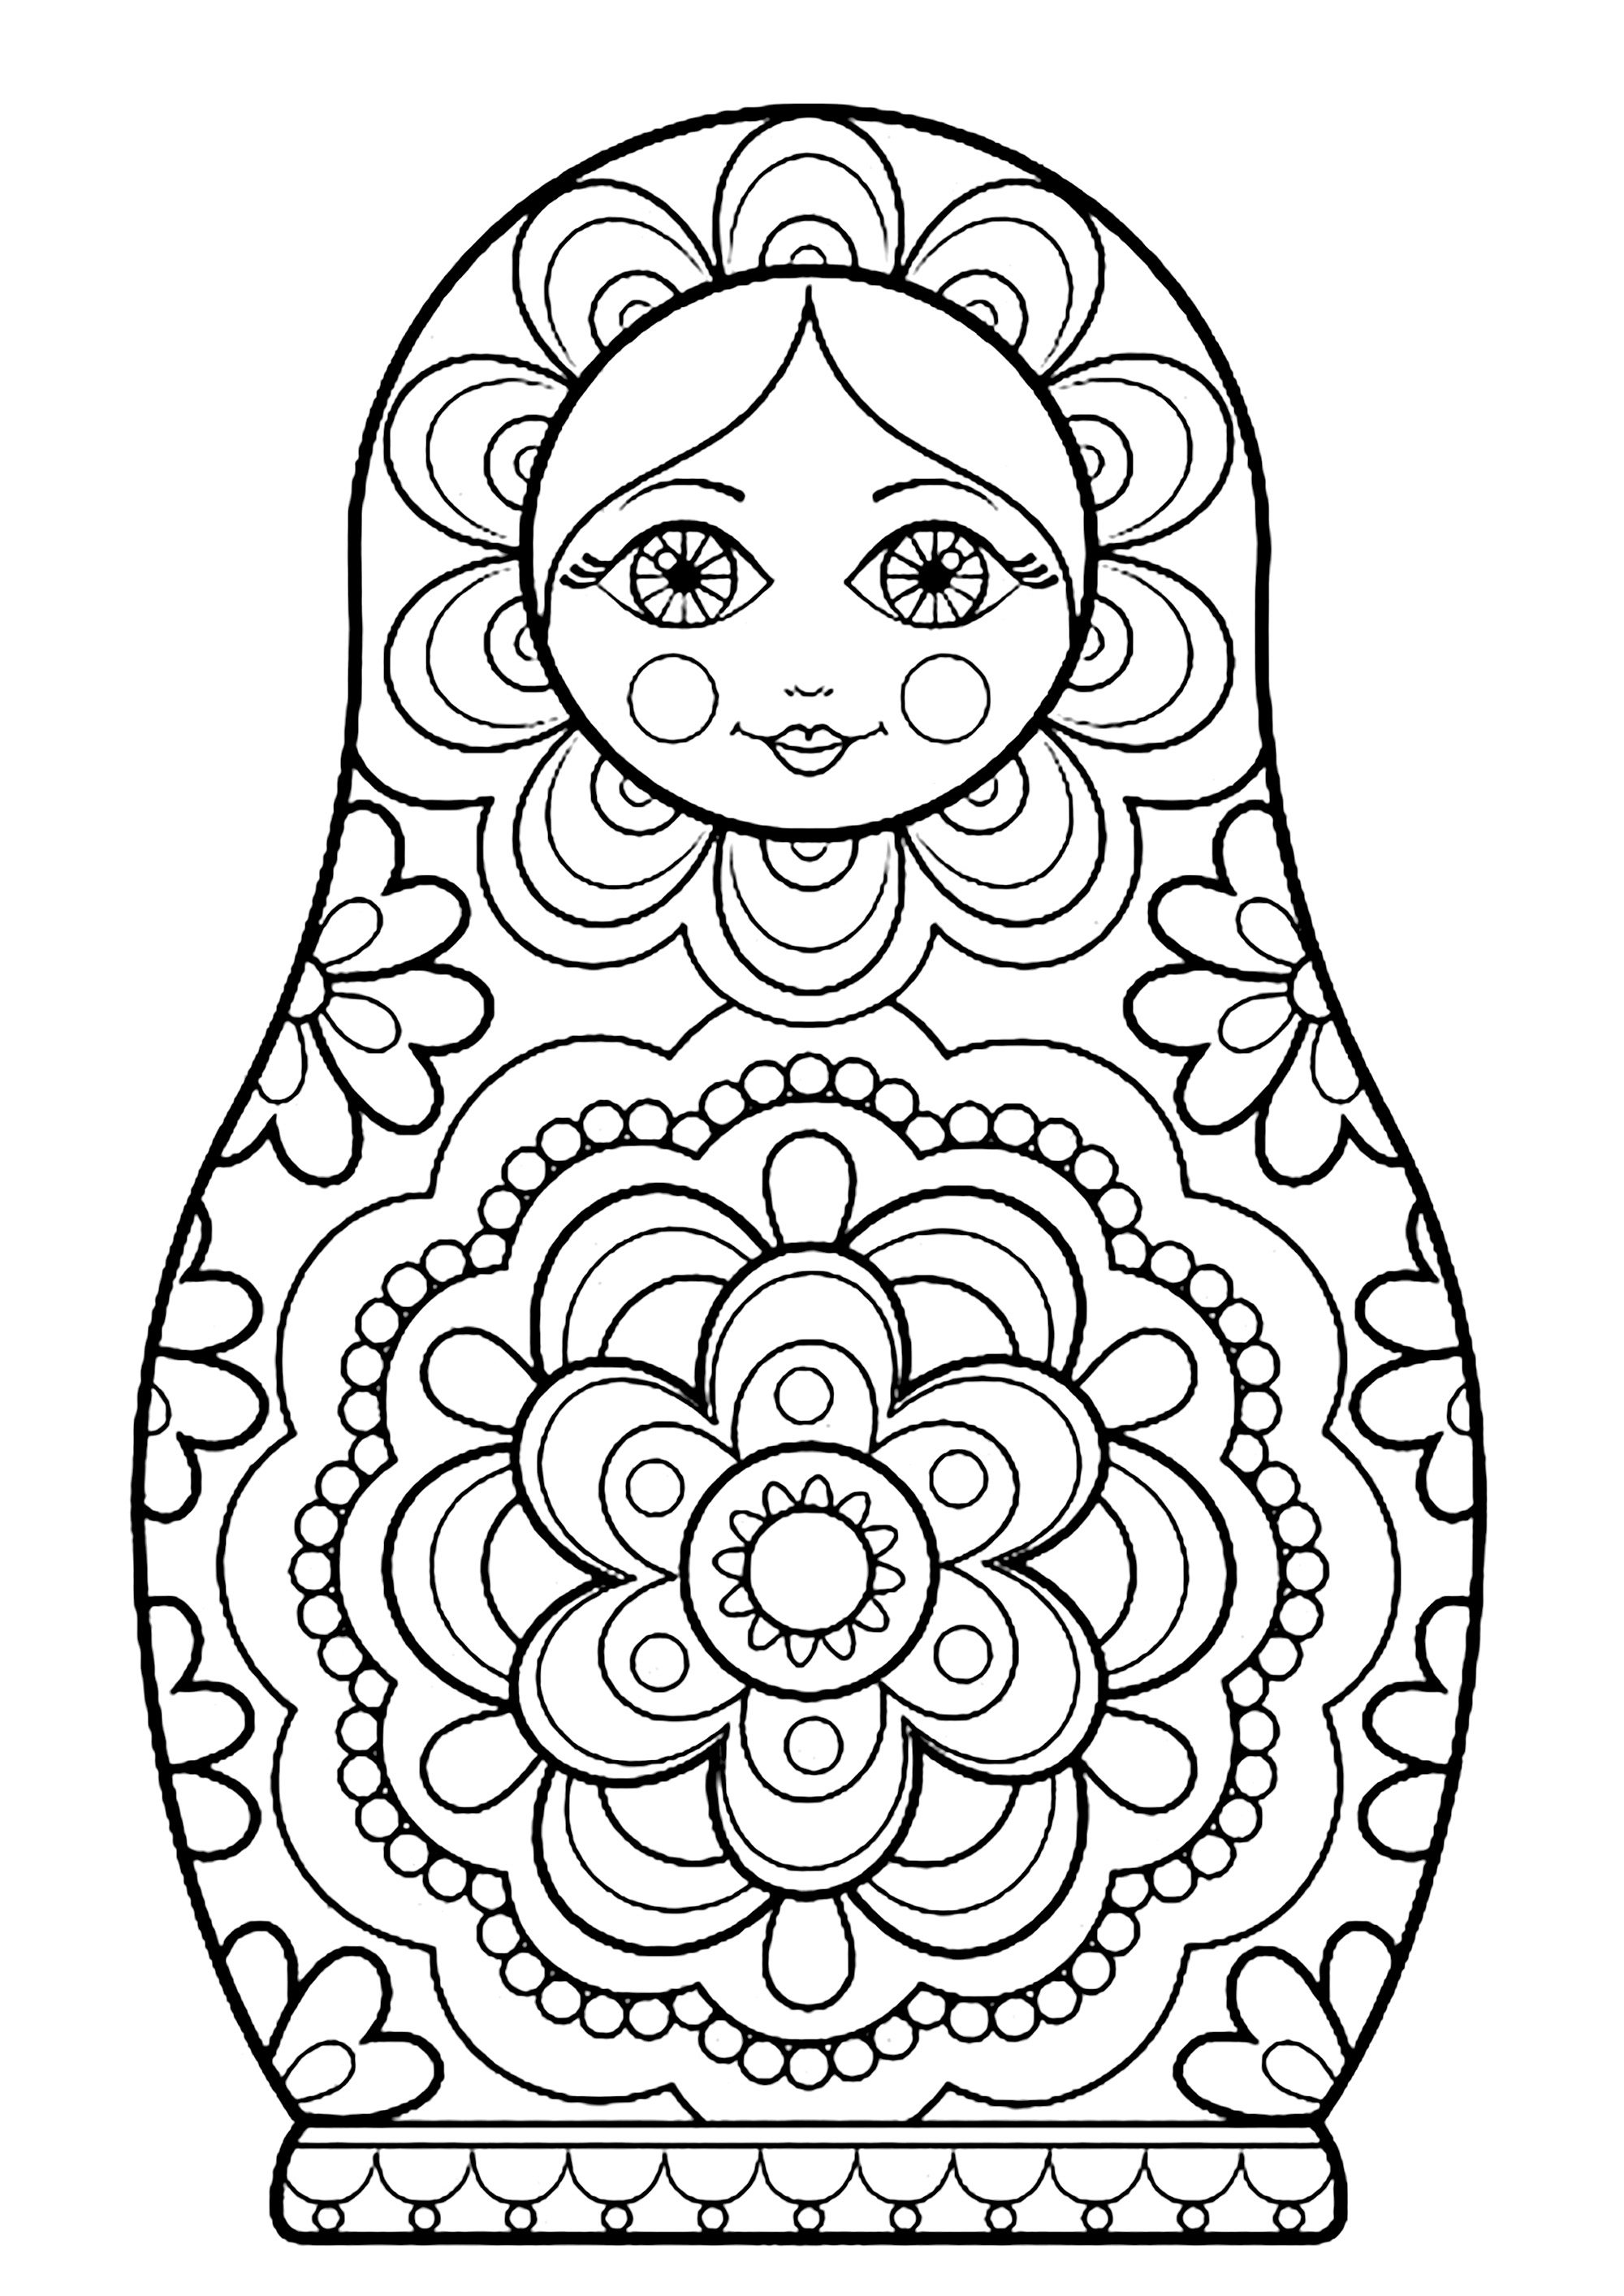 Coloring page : Russian dolls - 2